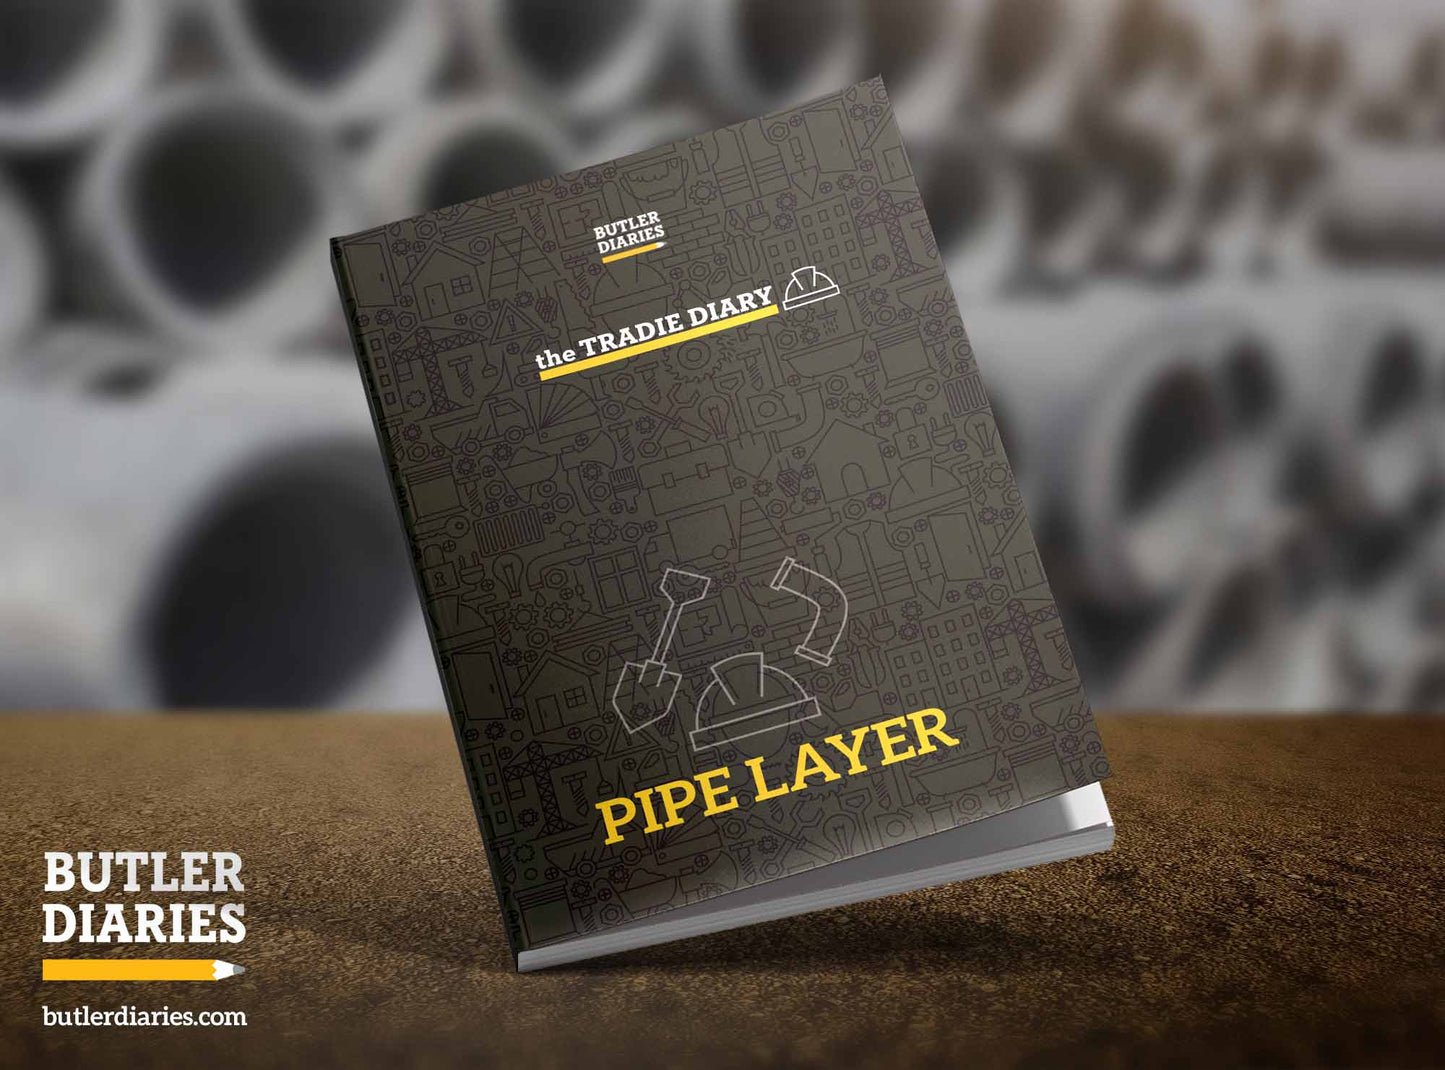 2023 The Tradie Diary: PIPELAYER